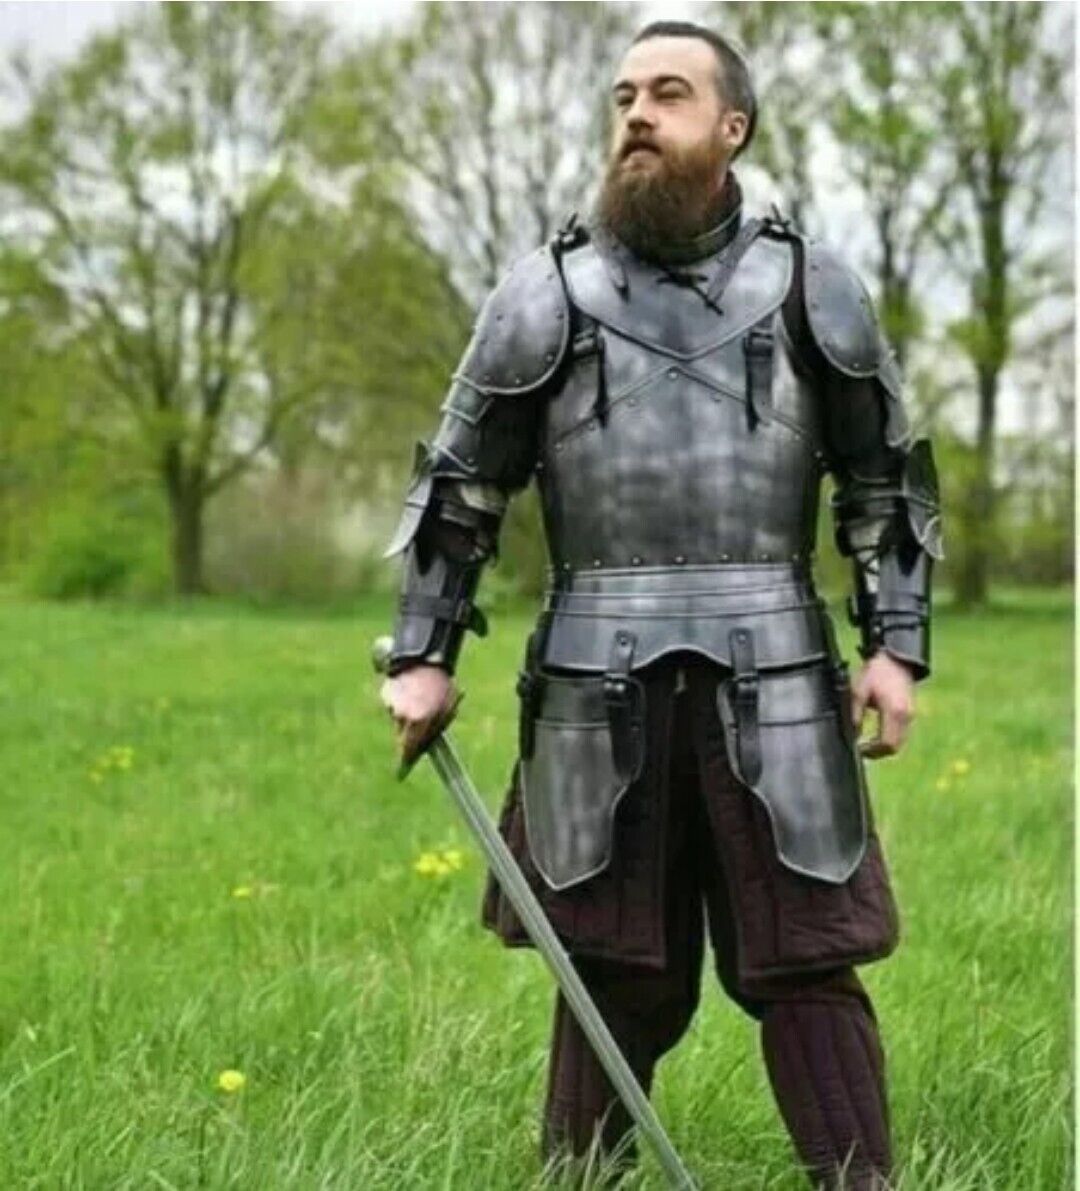 Medieval Body Armor 18G Steel LARP SCA Battle Armor Suit For Role & Cosplay